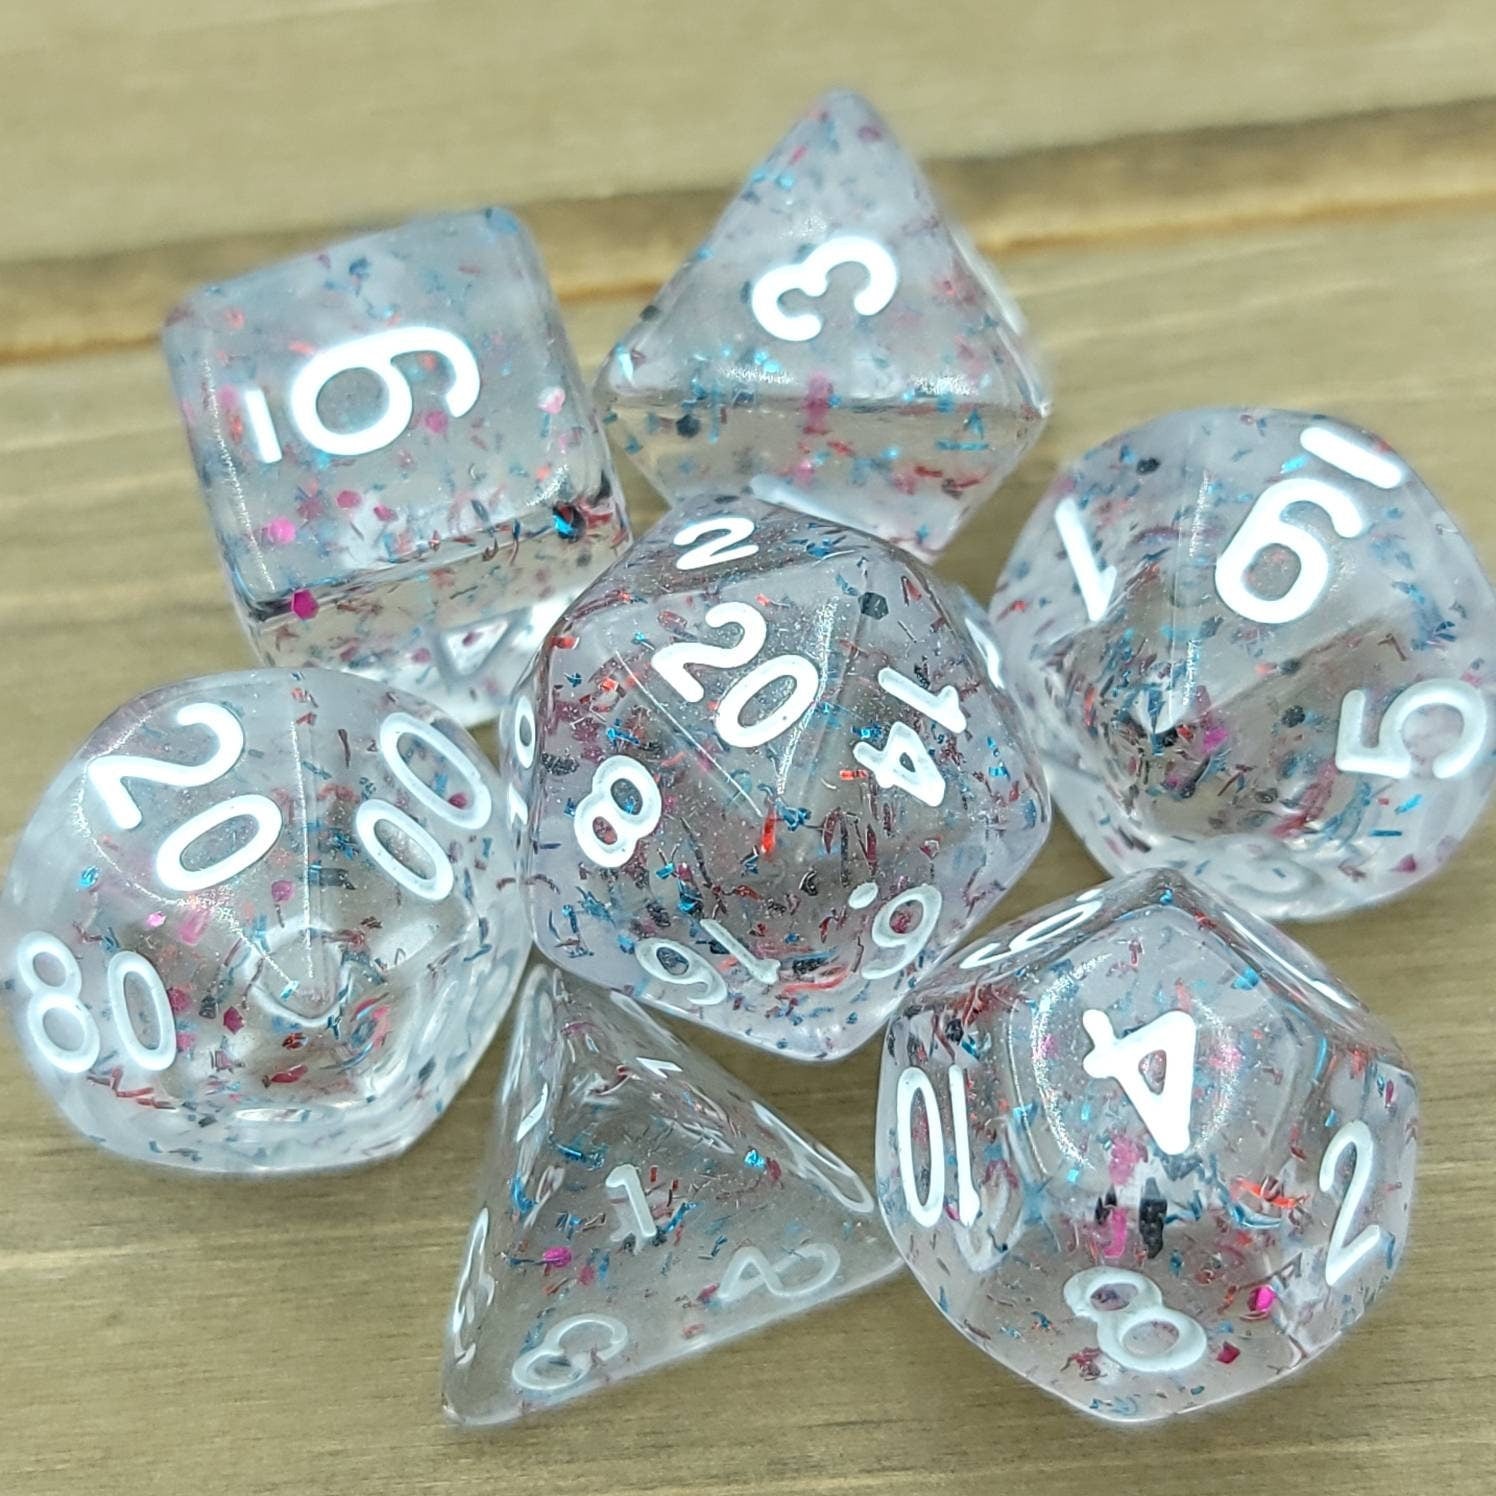 Rainbow Confetti | RPG Dice Set| RPG Dice | Polyhedral Dice Set | Dungeons and Dragons | DnD Dice Set | Gaming Dice Set